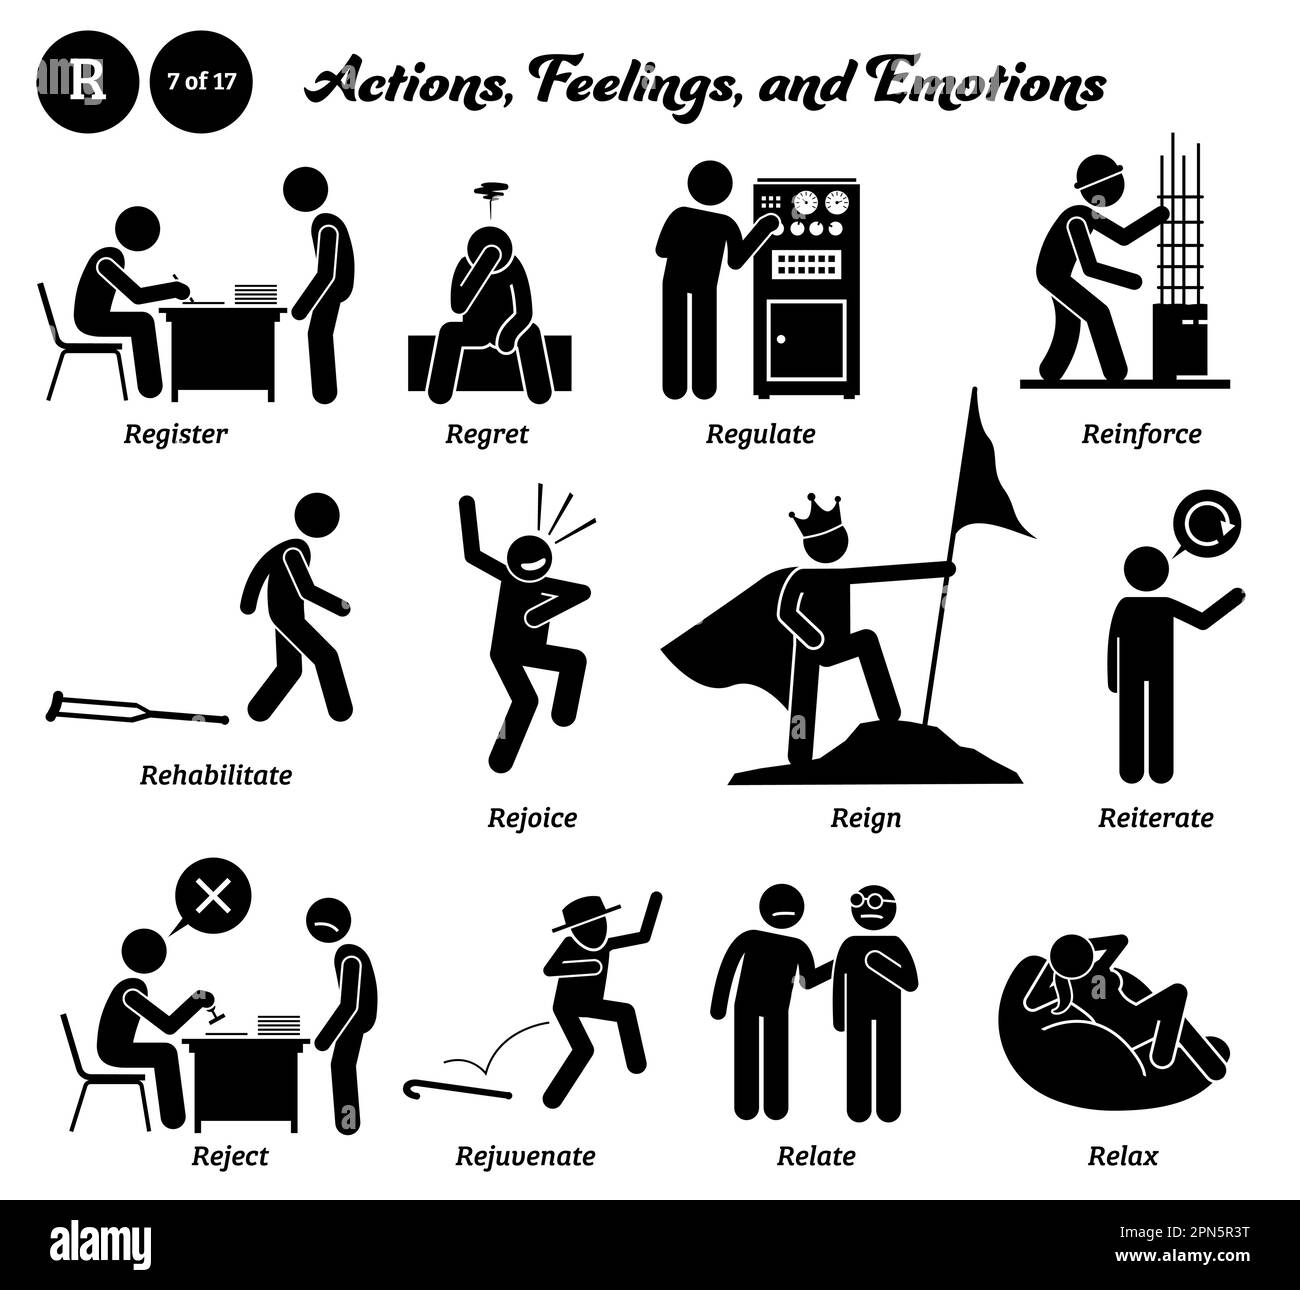 Stick figure human people man action, feelings, and emotions icons alphabet R. Register, regret, regulate, reinforce, rehabilitate, rejoice, reign, re Stock Vector